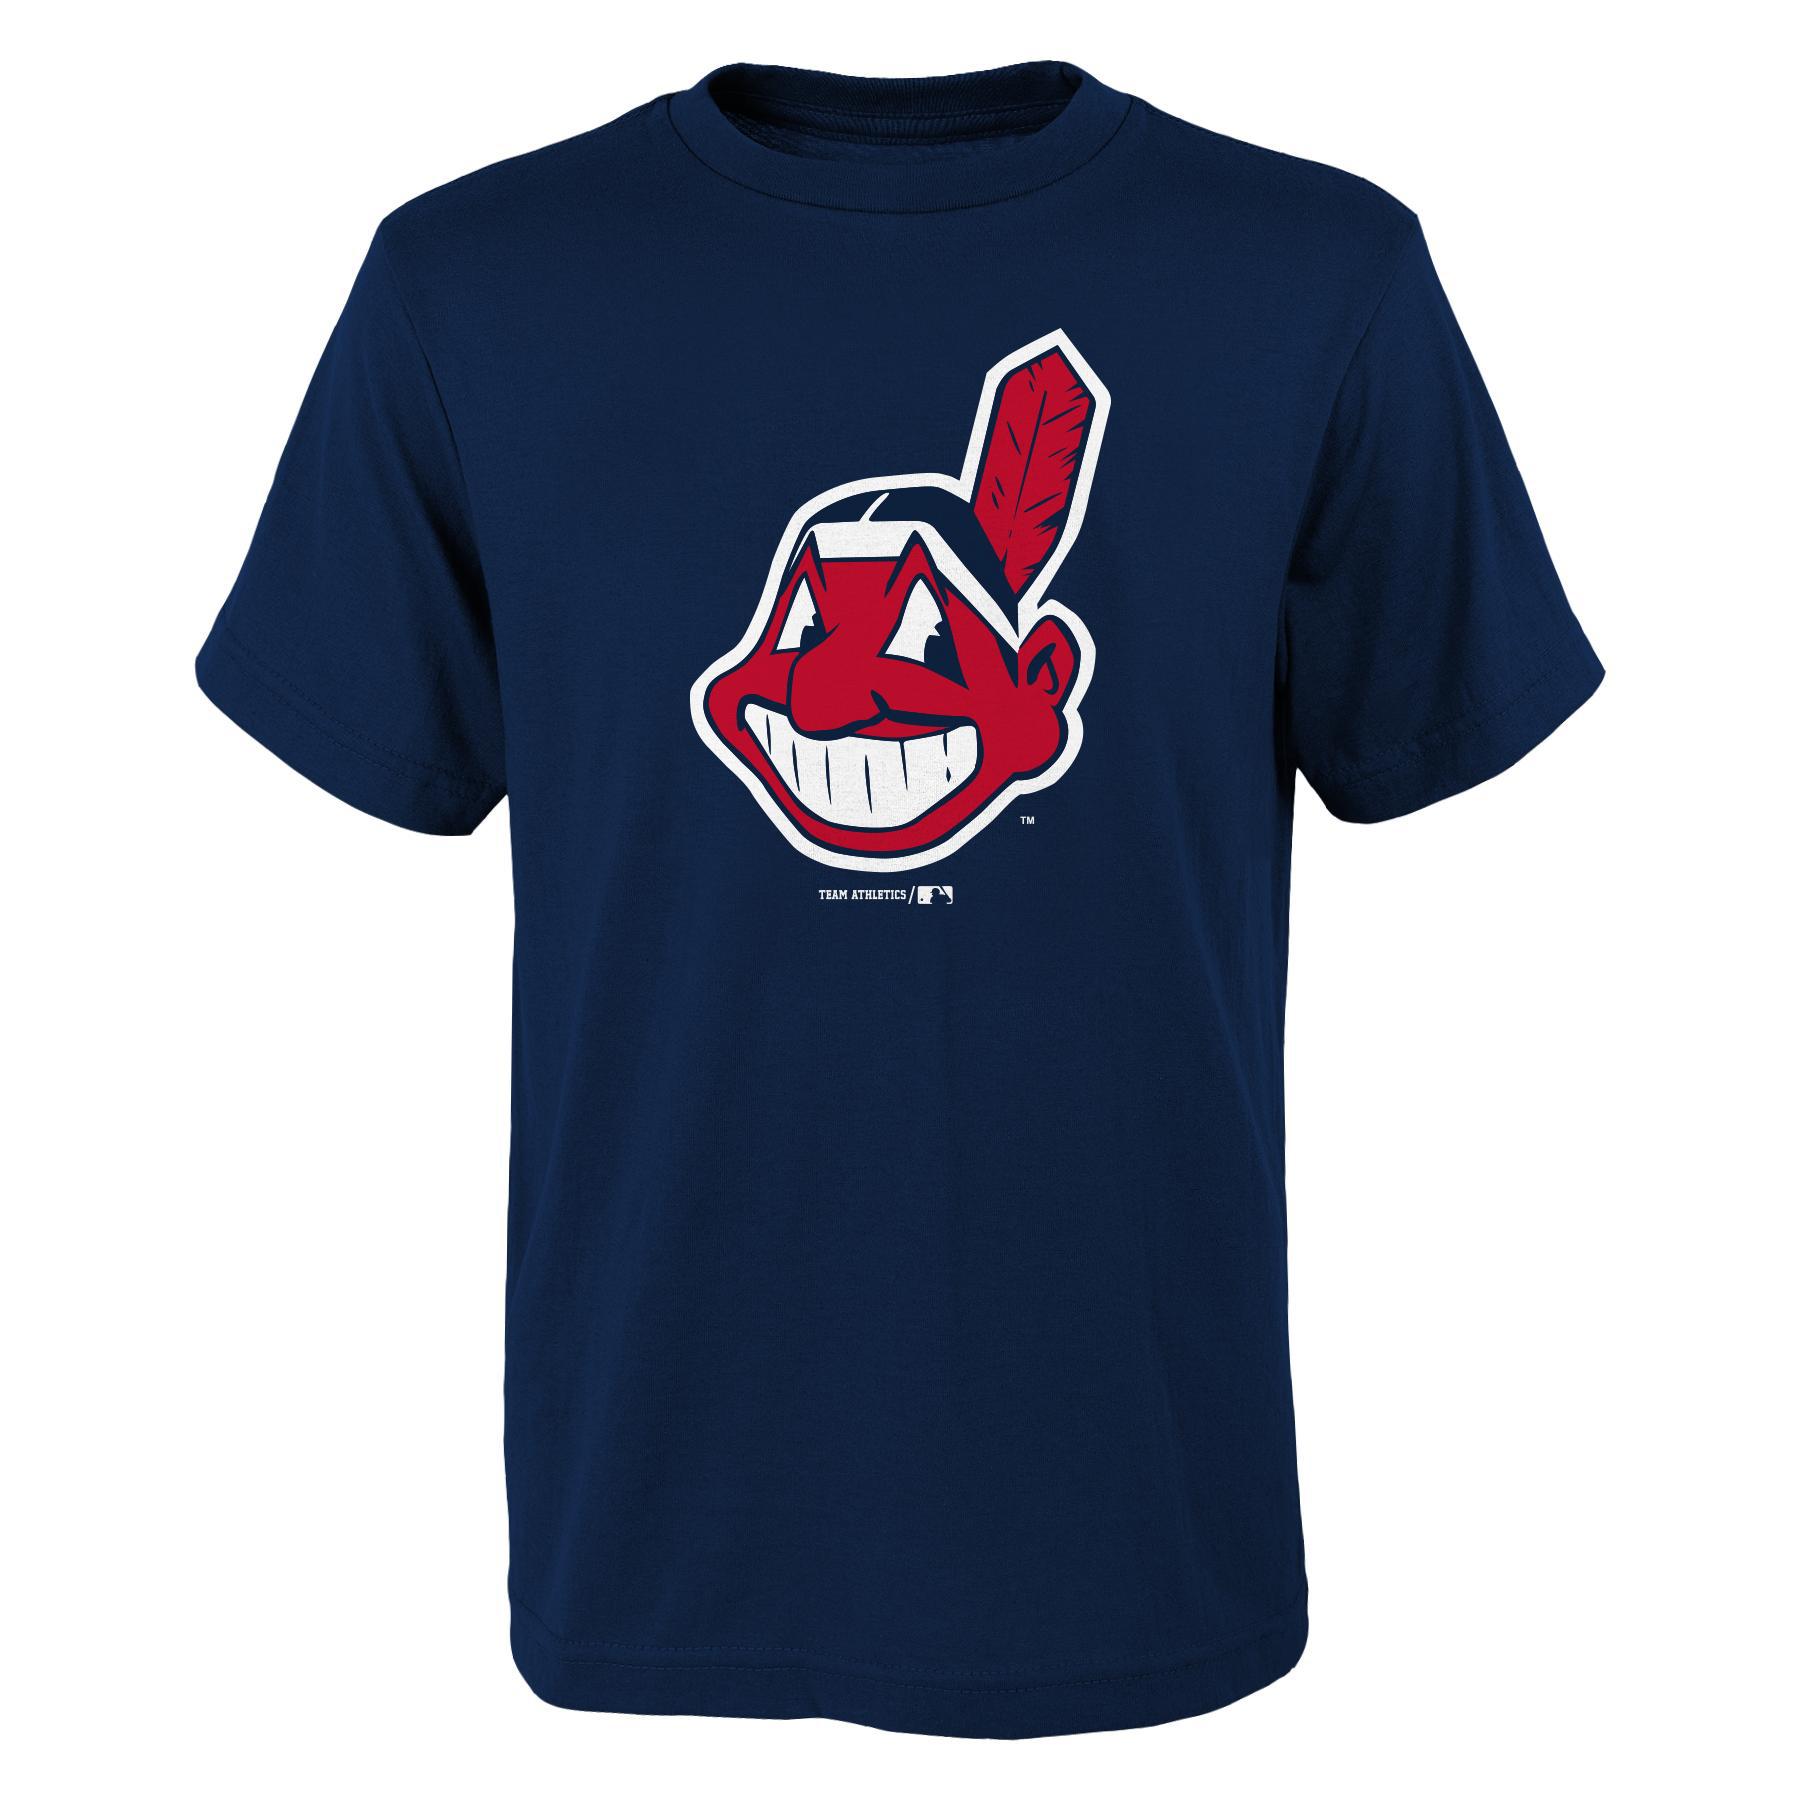 MLB Boy's Graphic T-Shirt - Cleveland Indians